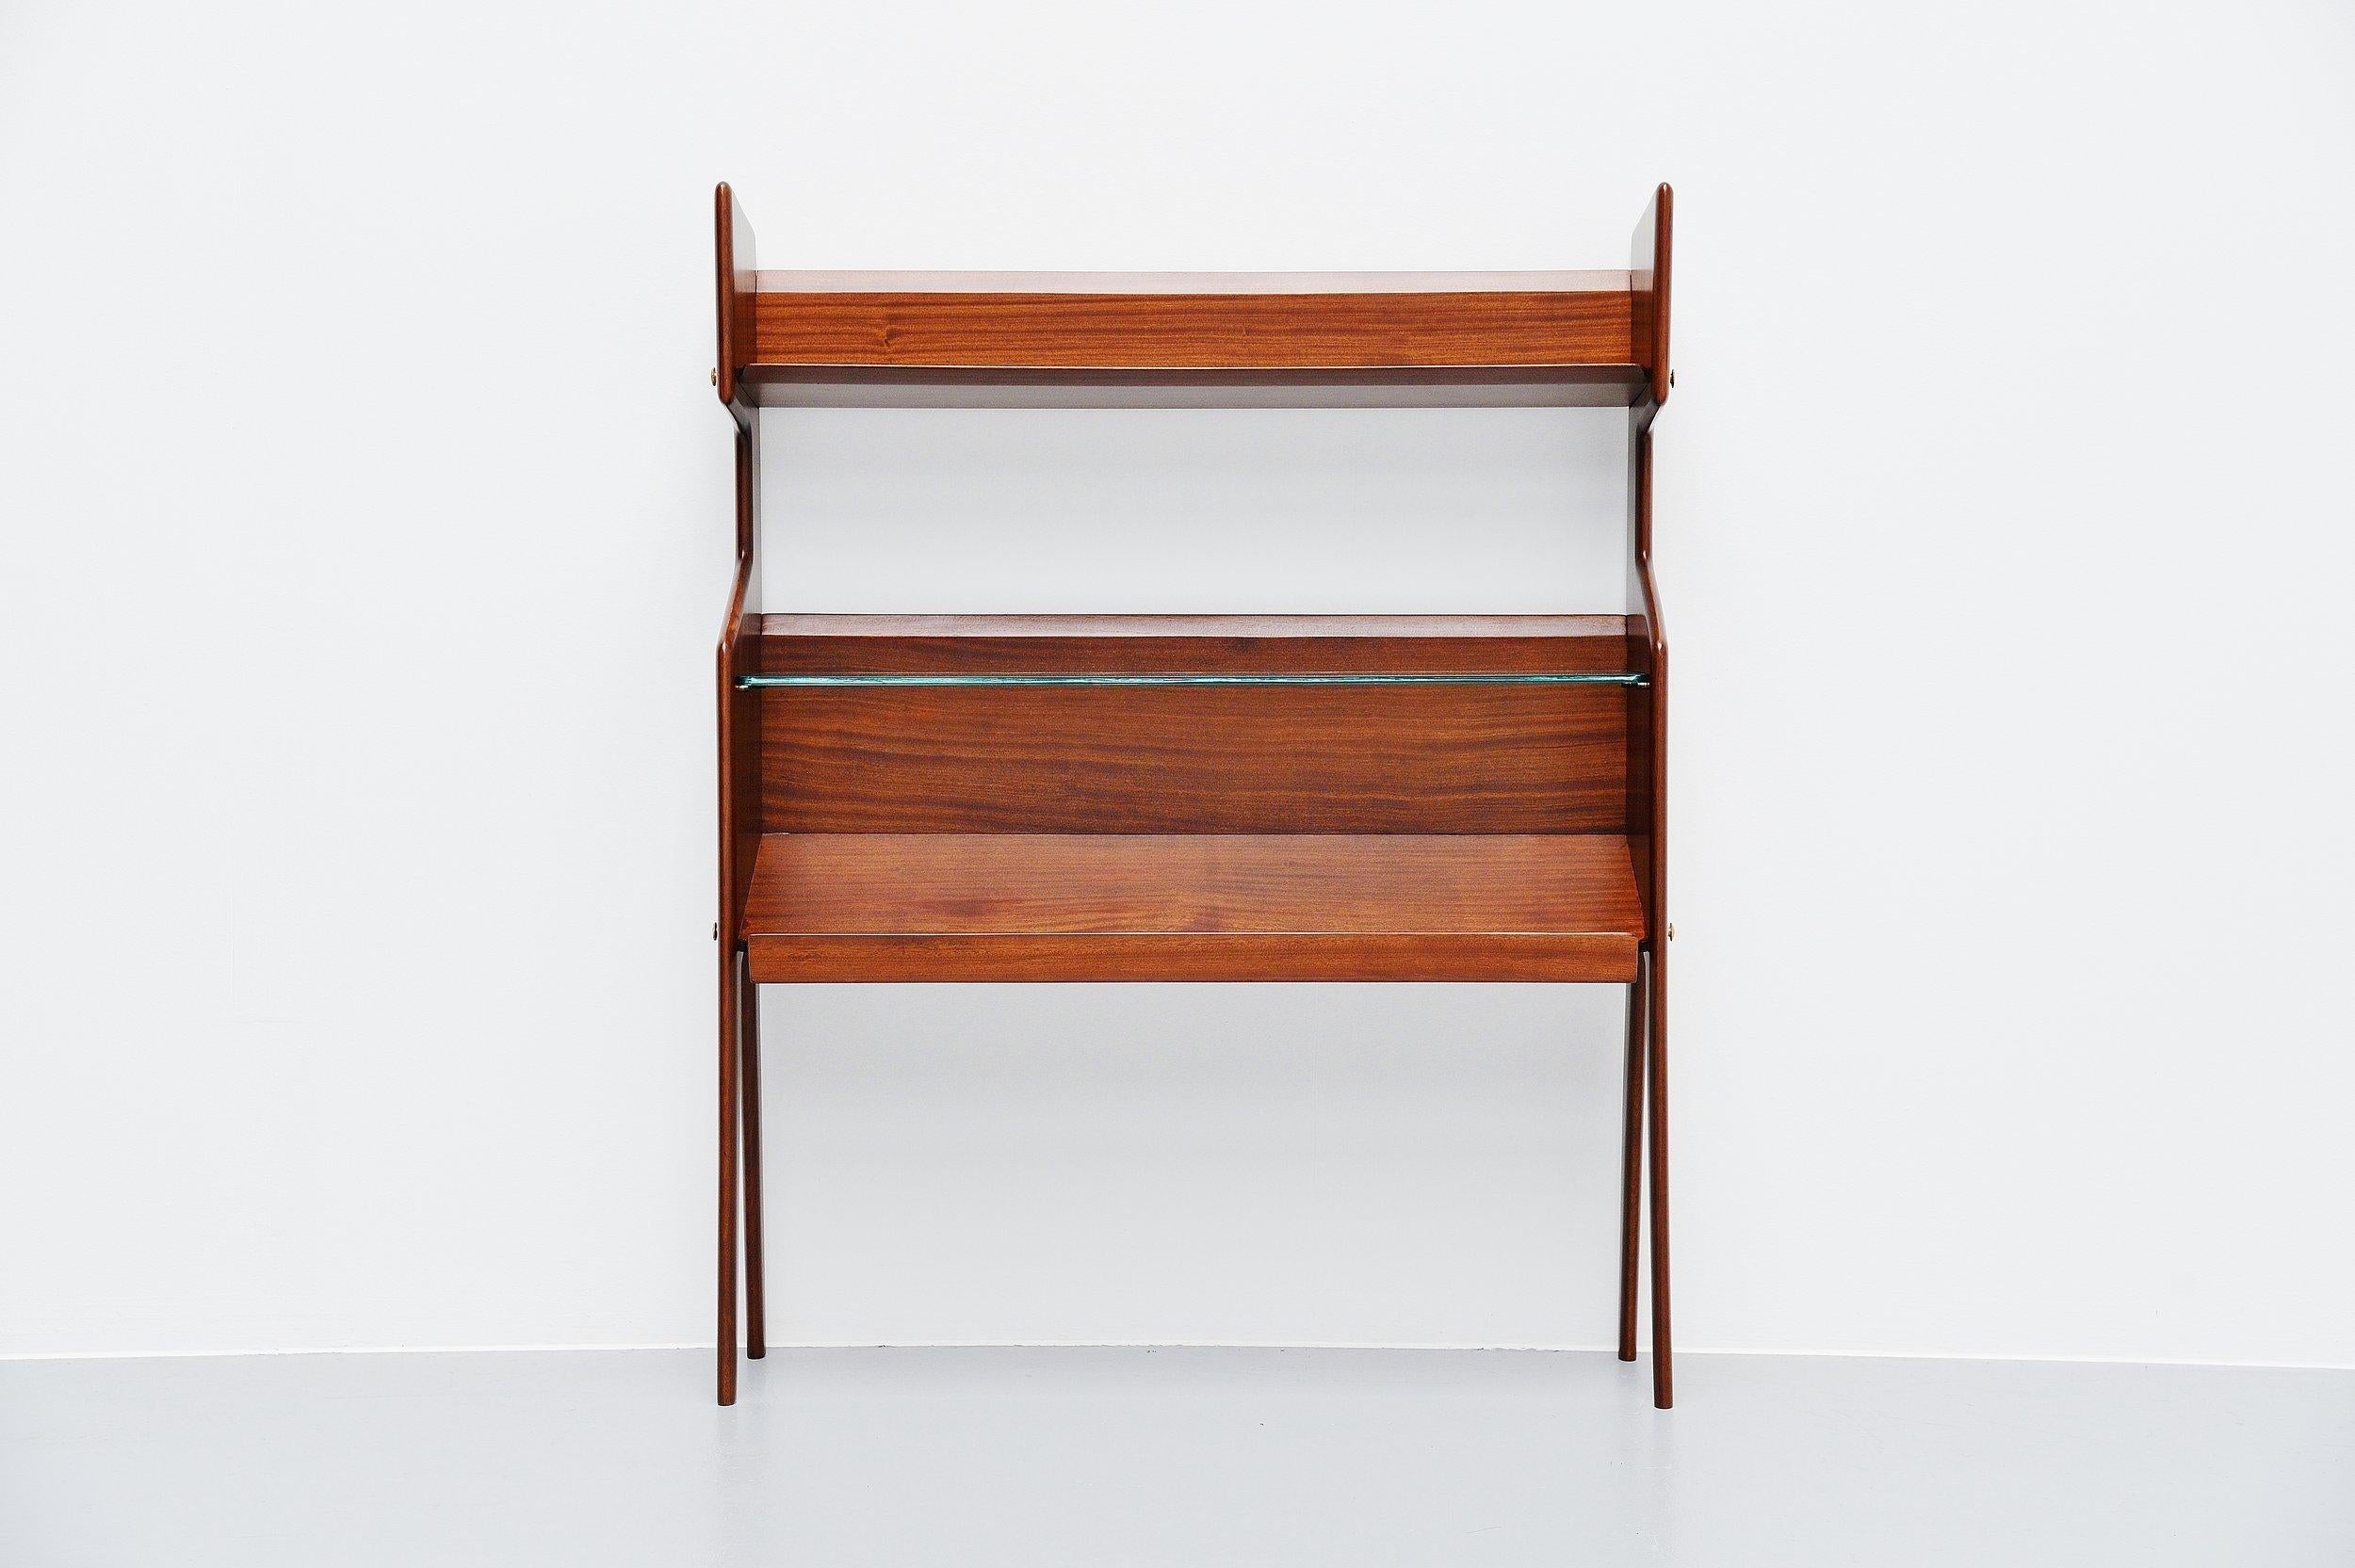 Super rare and beautiful bookcase model 459 designed by Ico Parisi and manufactured by Angelo De Baggis Cantu, Italy, 1955. The bookcase is formed of 2 solid wood carved supports with long, sleek legs at the bottom. The supports are joined together